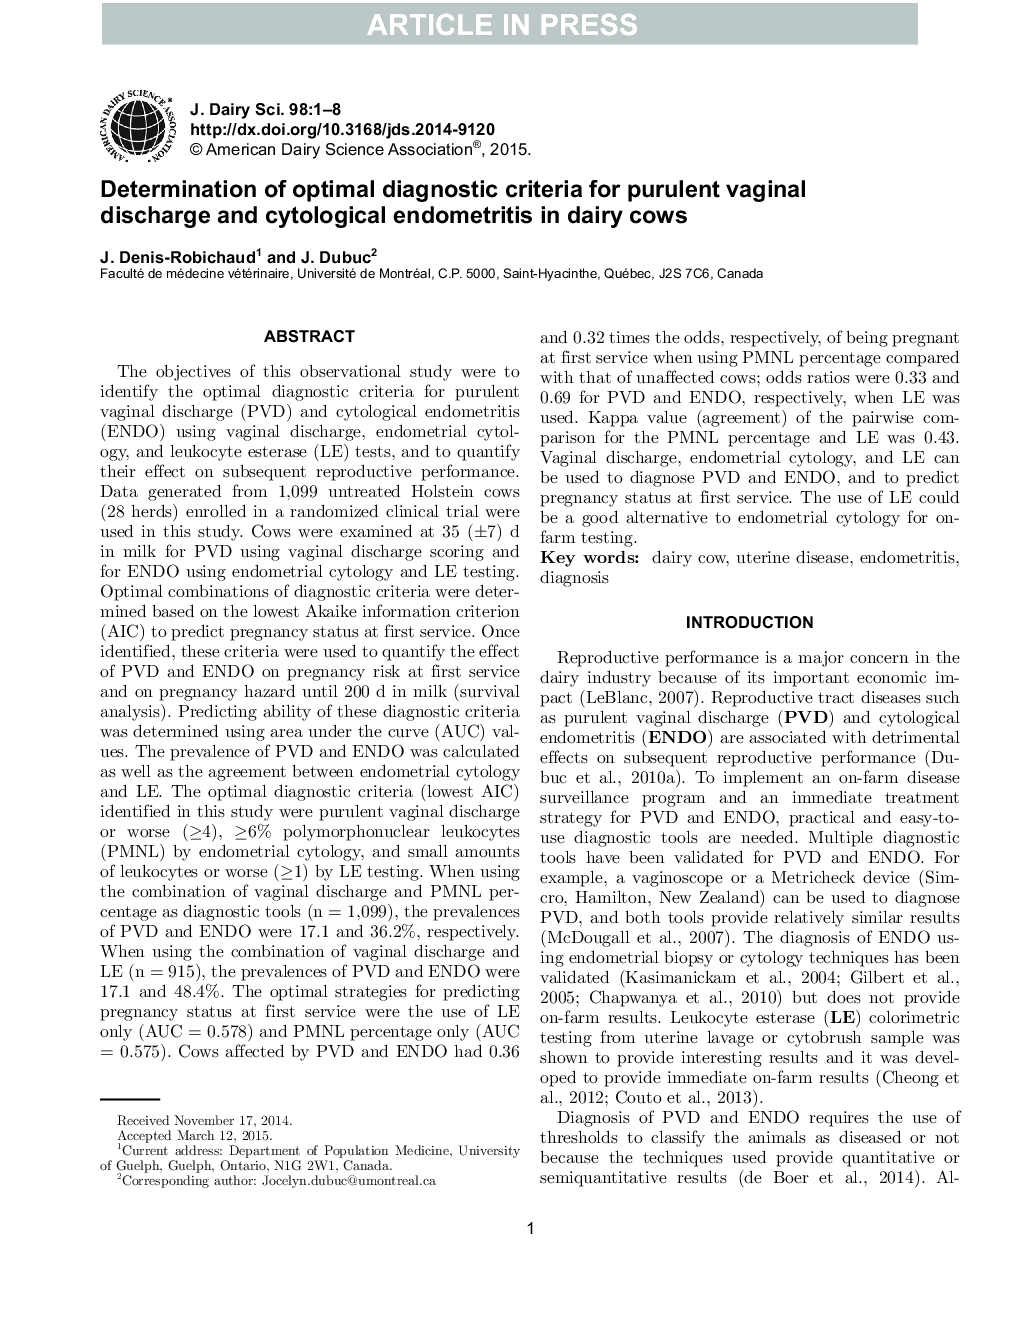 Determination of optimal diagnostic criteria for purulent vaginal discharge and cytological endometritis in dairy cows